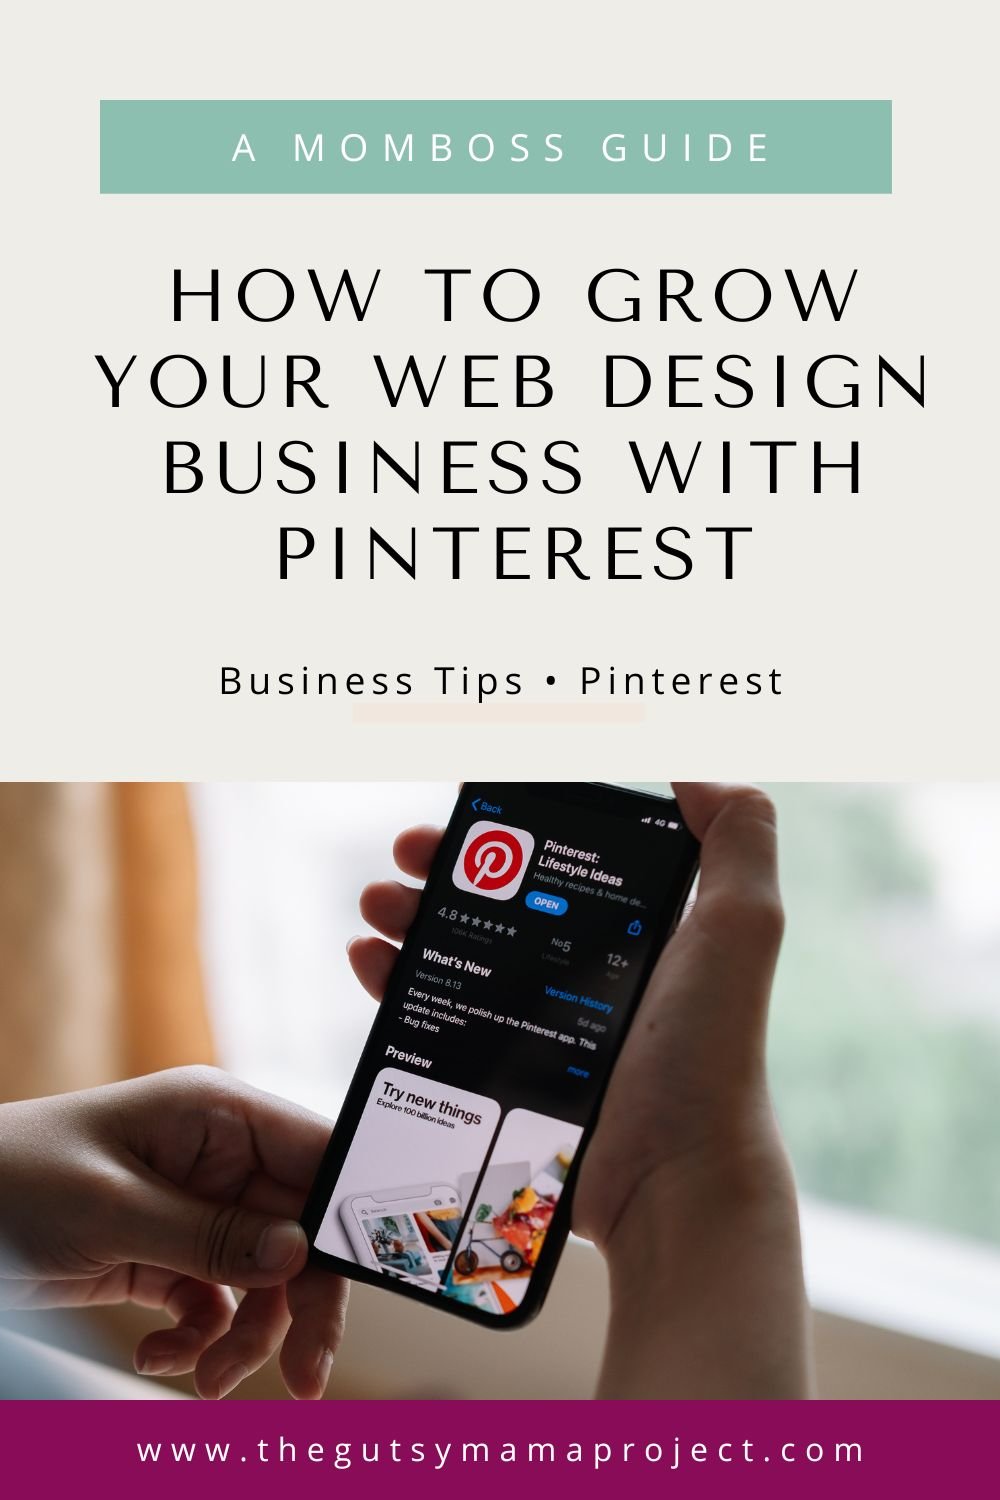 How to Grow Your Web Design Business with Pinterest - thegutsymamaproject.com.jpg